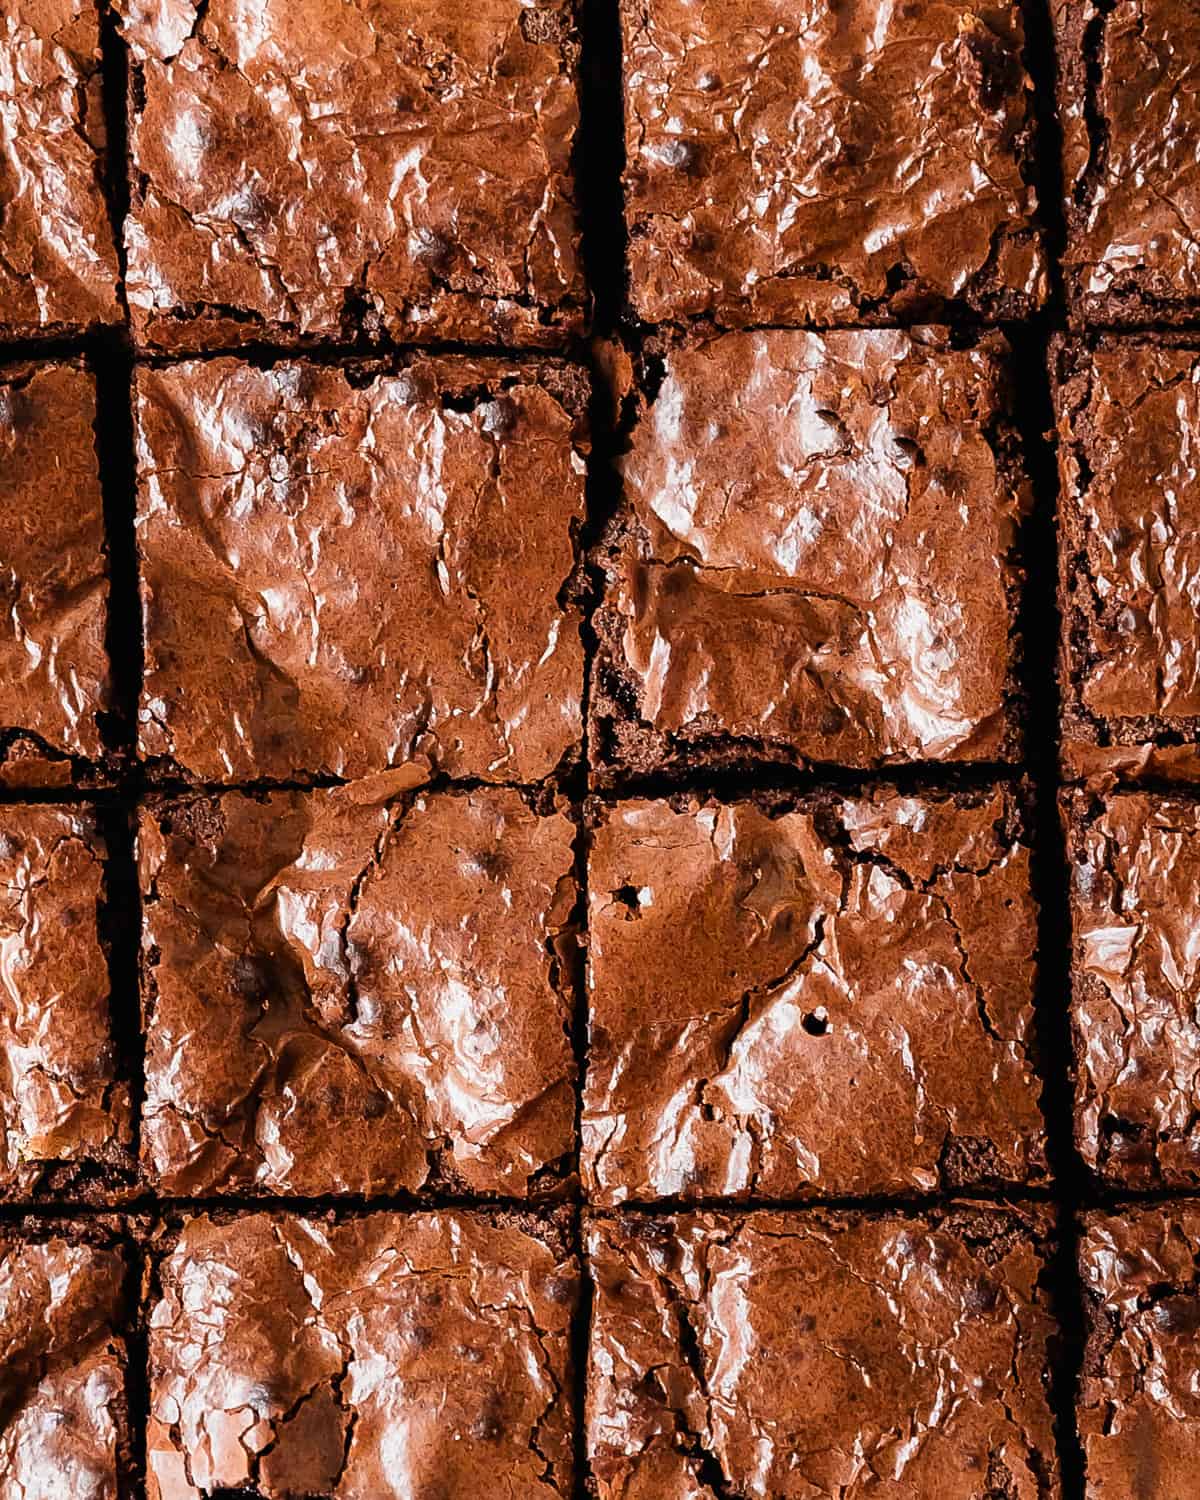 These dairy free brownies are deliciously fudgy with chewy centers, crackle tops and pockets of melty chocolate. They’re made with no butter, but are still rich and decadent. Grab a large mixing bowl, a spoon and make these incredibly easy no butter brownies everyone is sure to love!